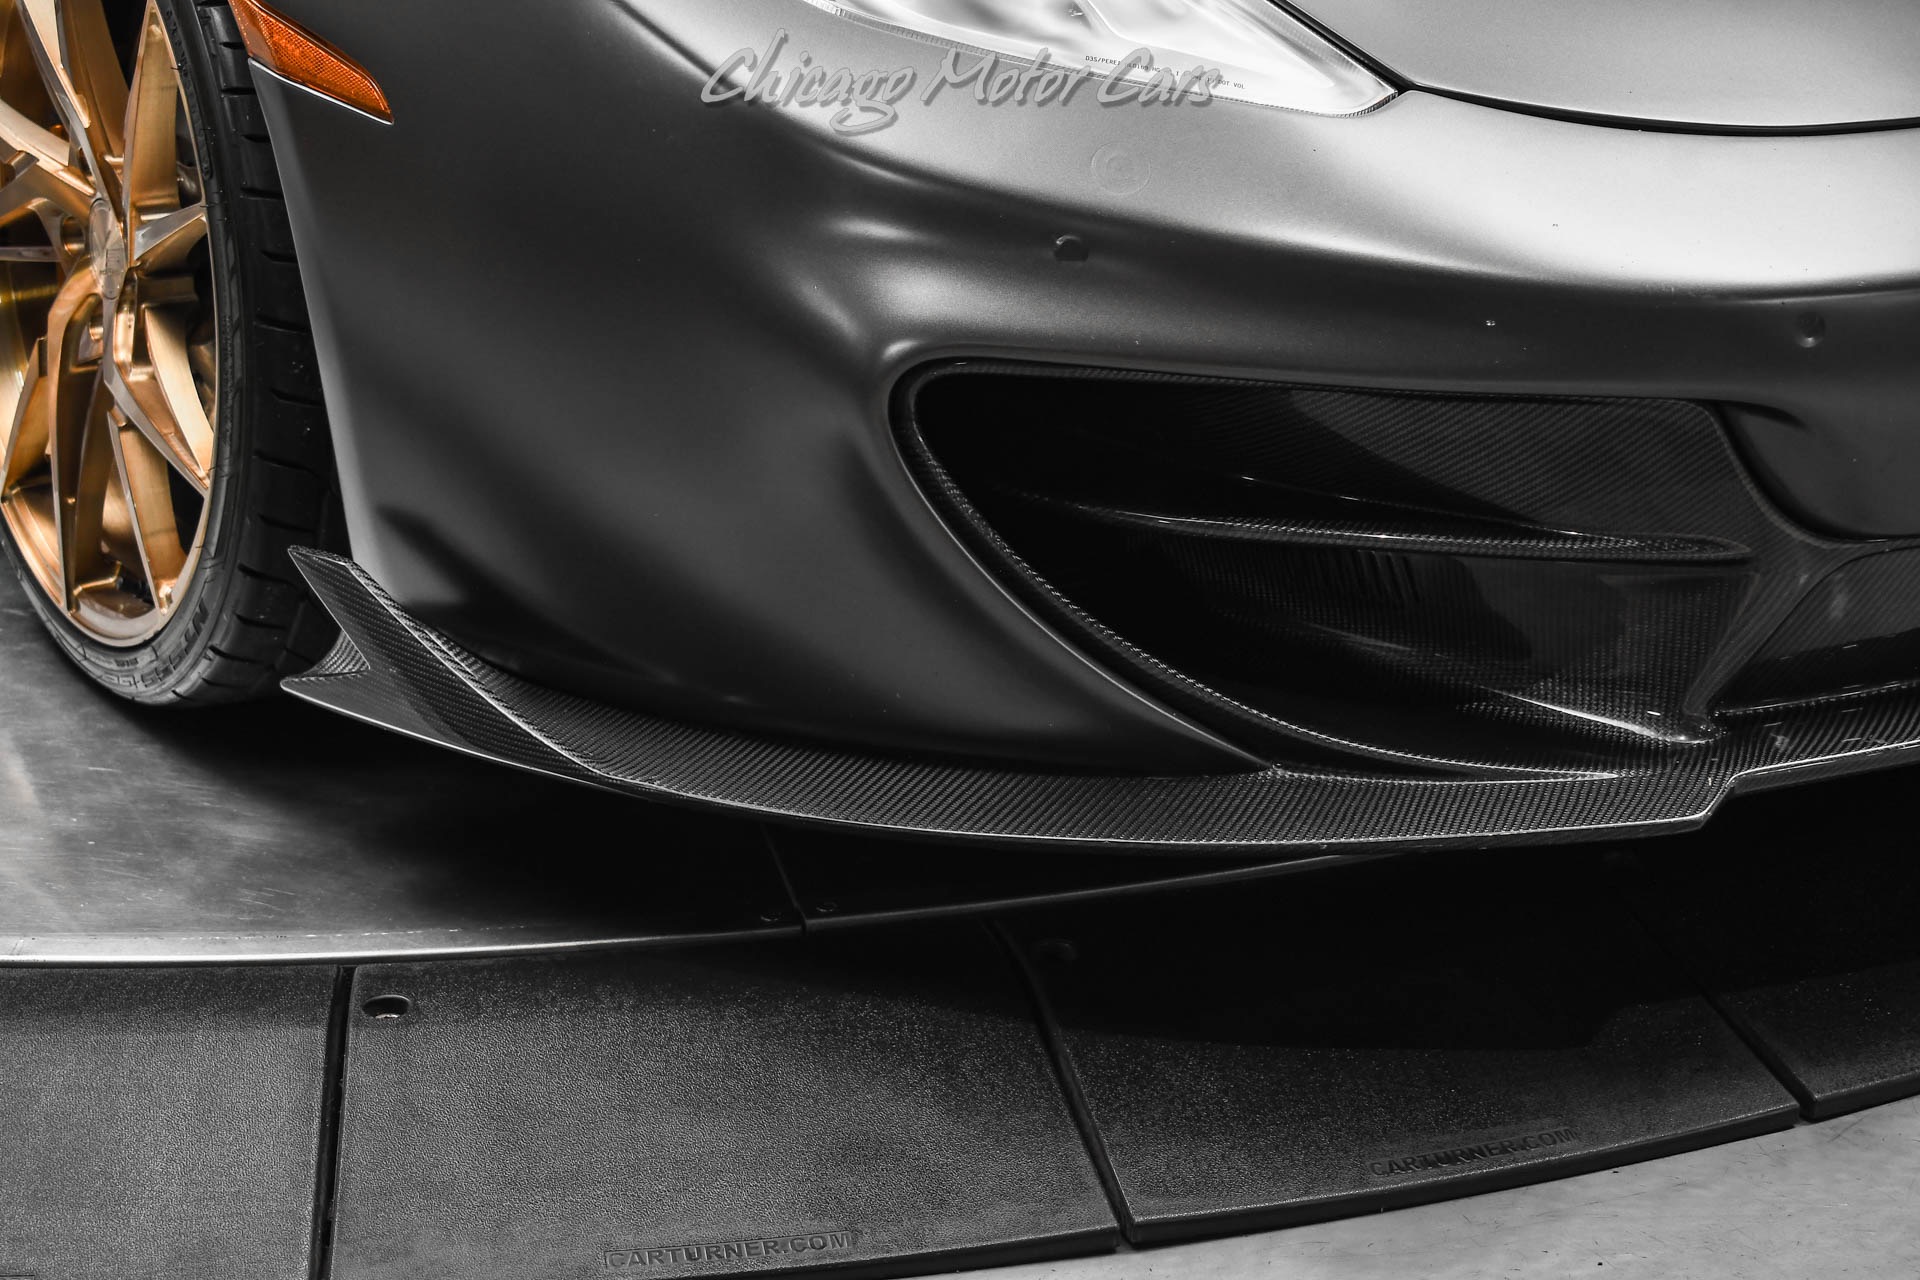 Used-2012-McLaren-MP4-12C-Coupe-Stunning-Spec-Pure-800-Turbos-TONS-of-Carbon-Fiber-Stage-3-Tune